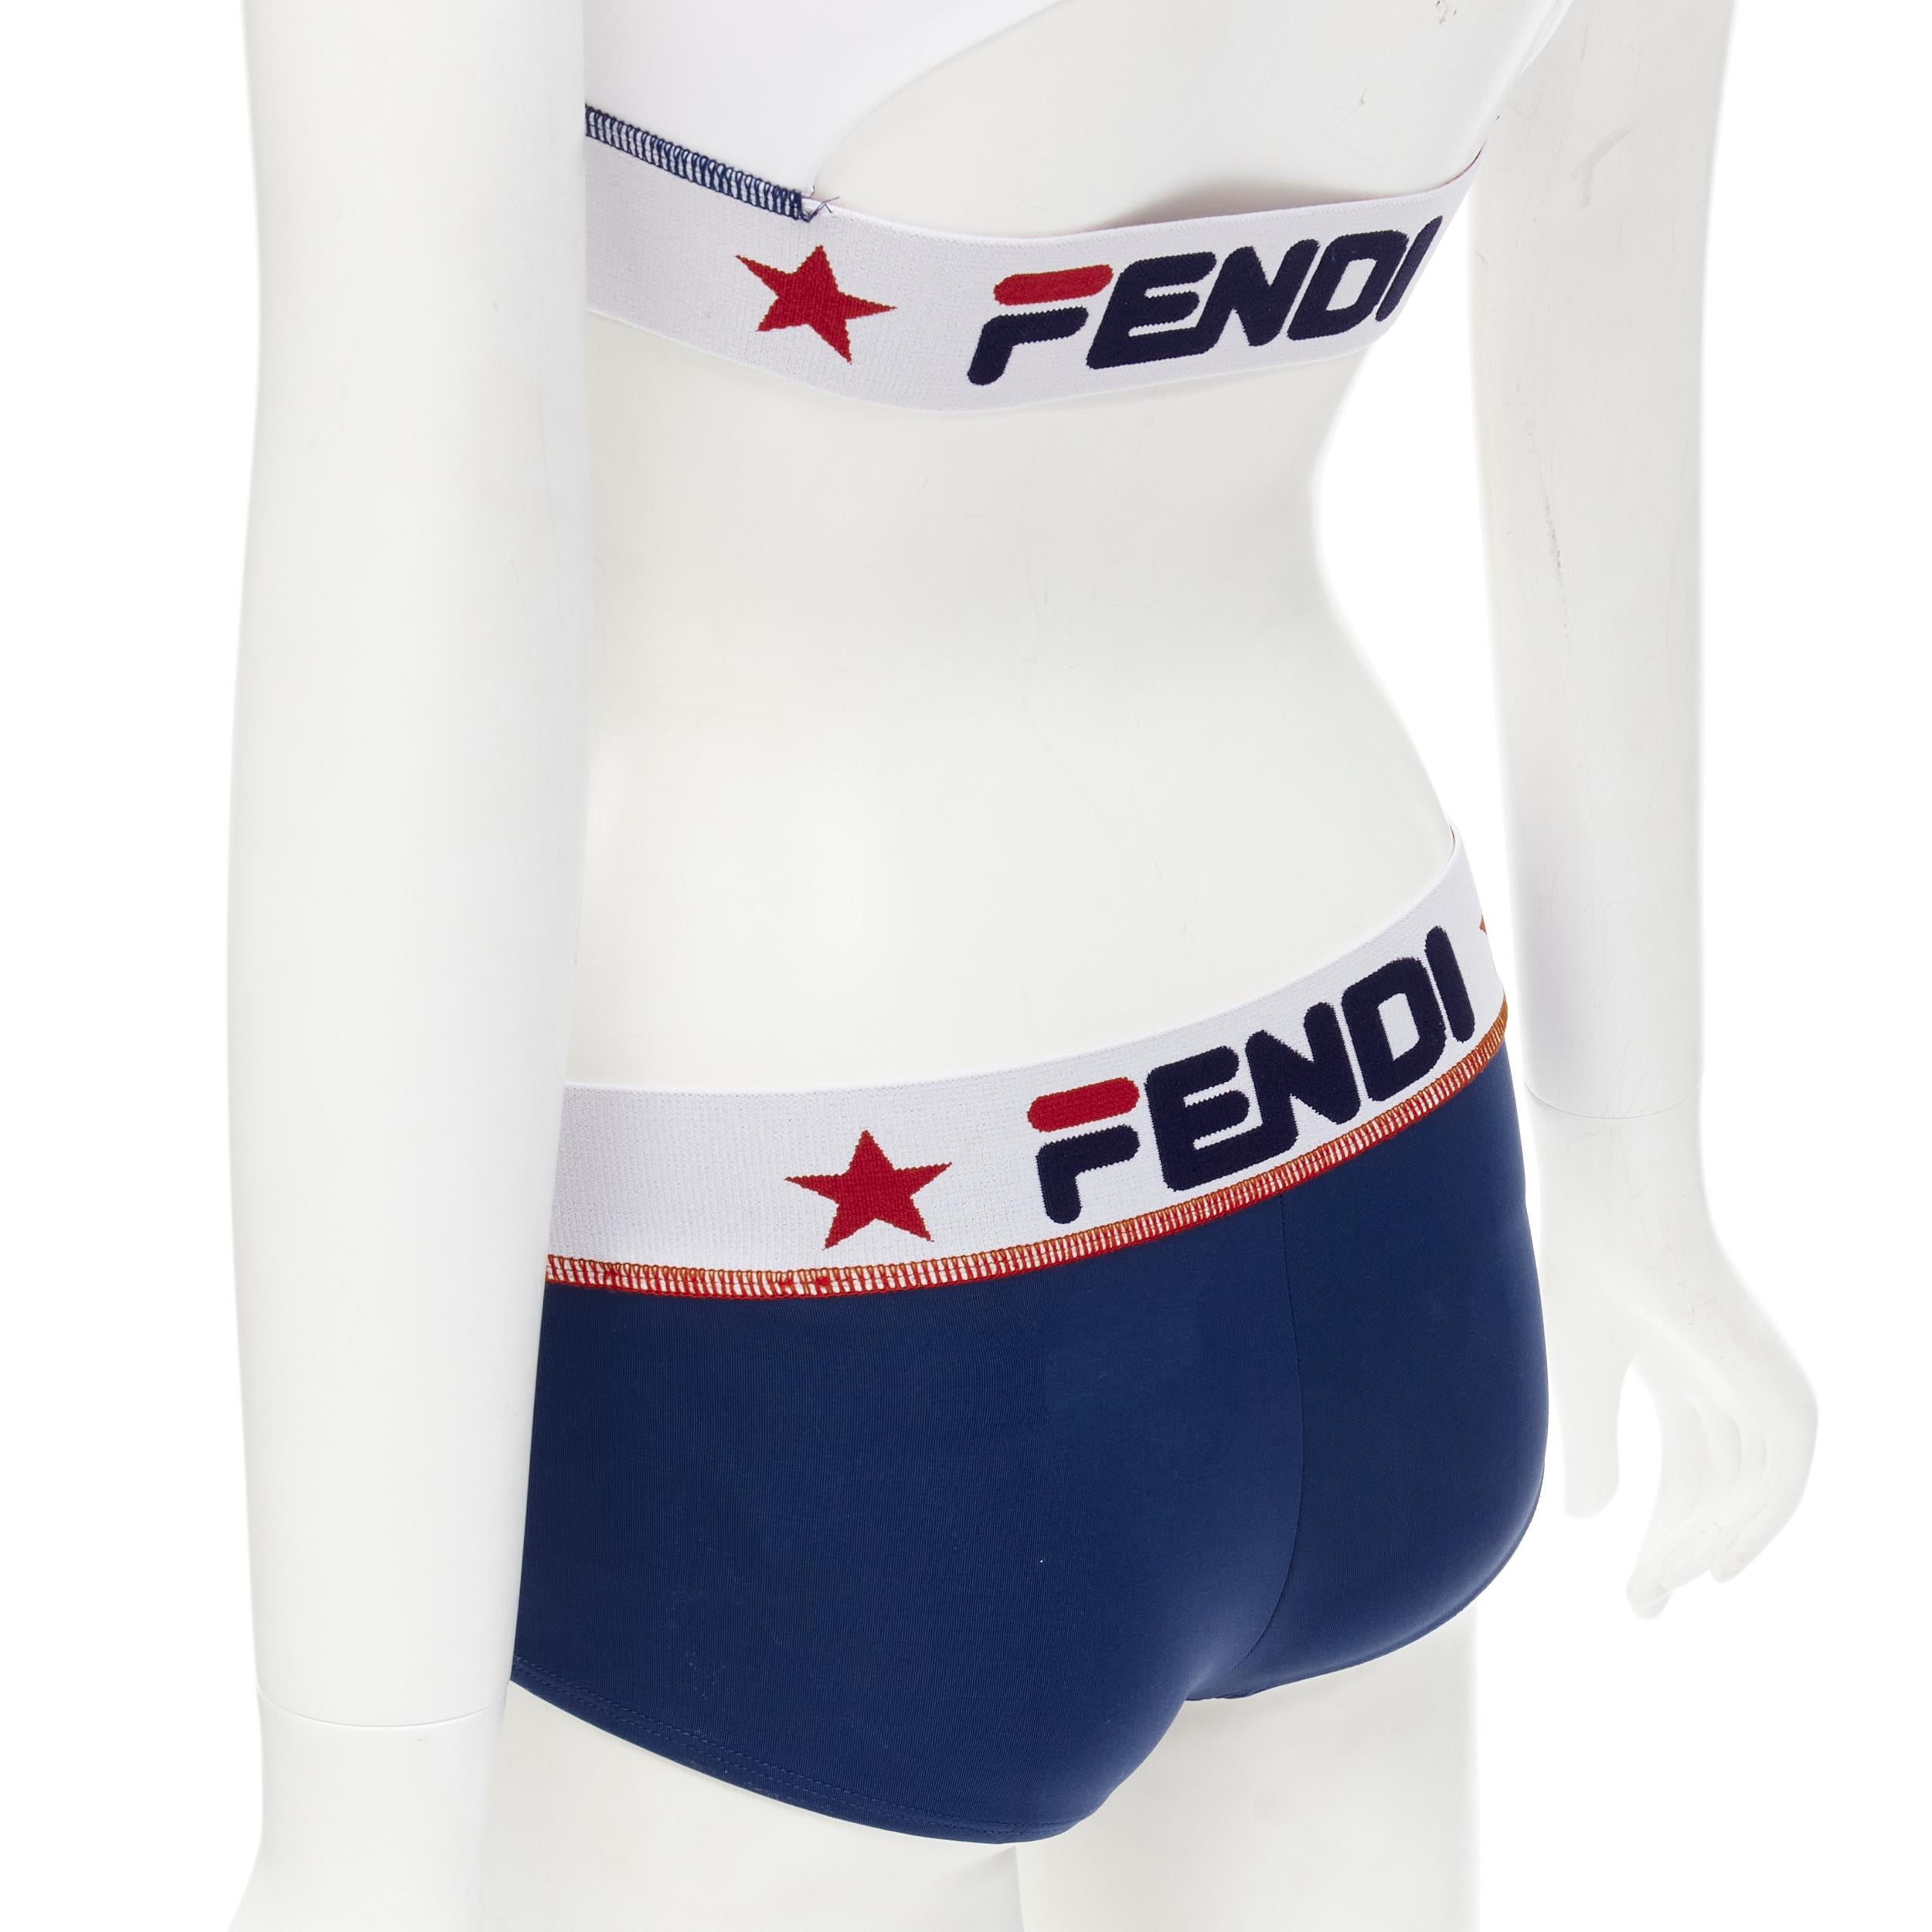 FENDI FILA Mania Zucca logo print white blue 2 piece bikini set IT38 XS In Excellent Condition For Sale In Hong Kong, NT